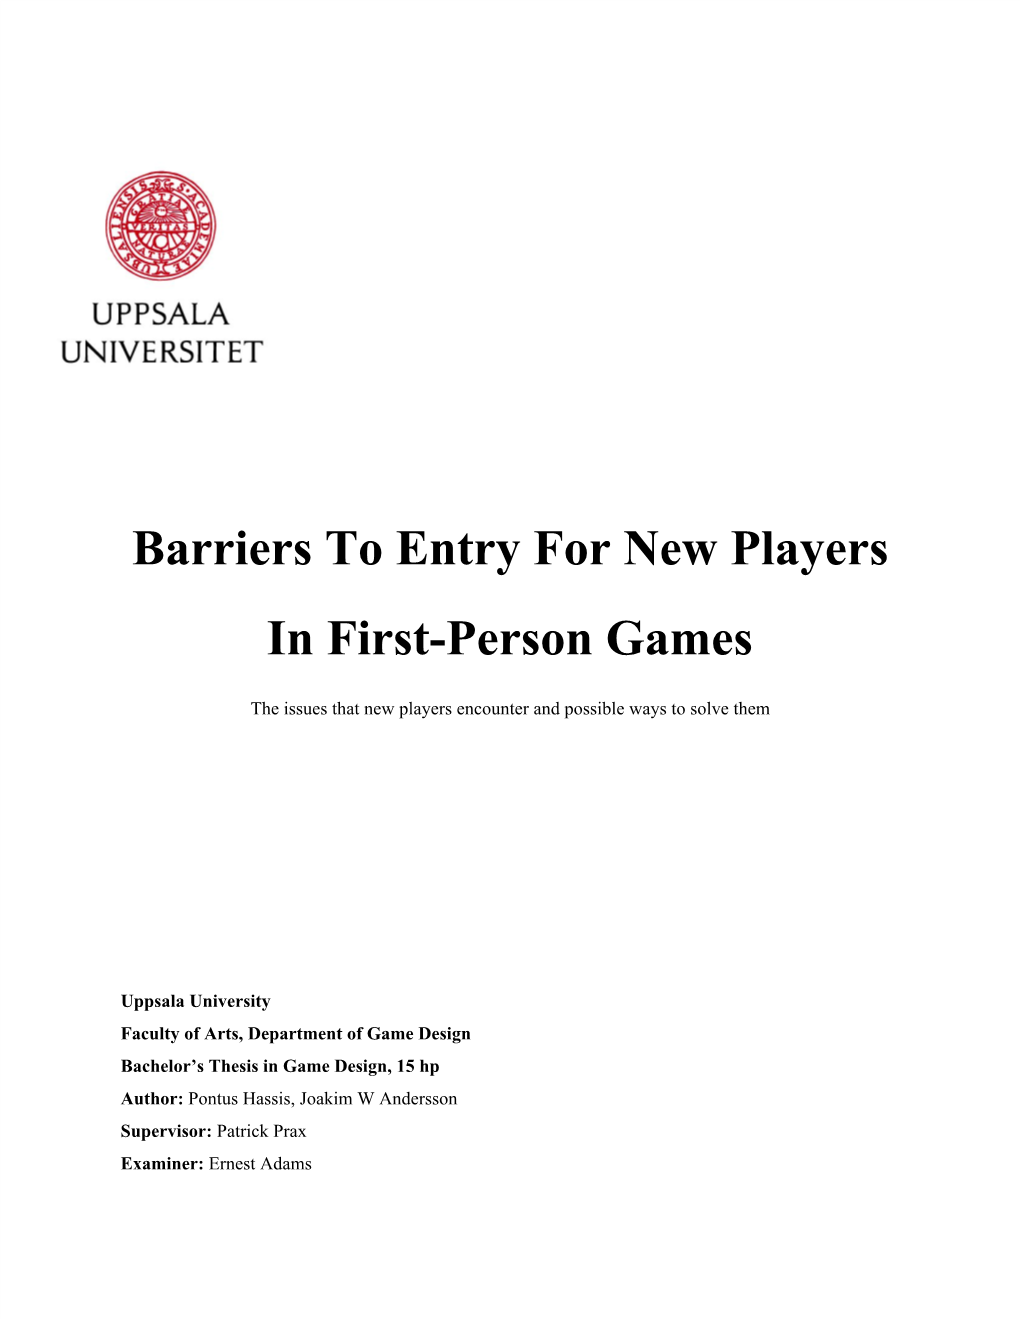 Barriers to Entry for New Players in First-Person Games